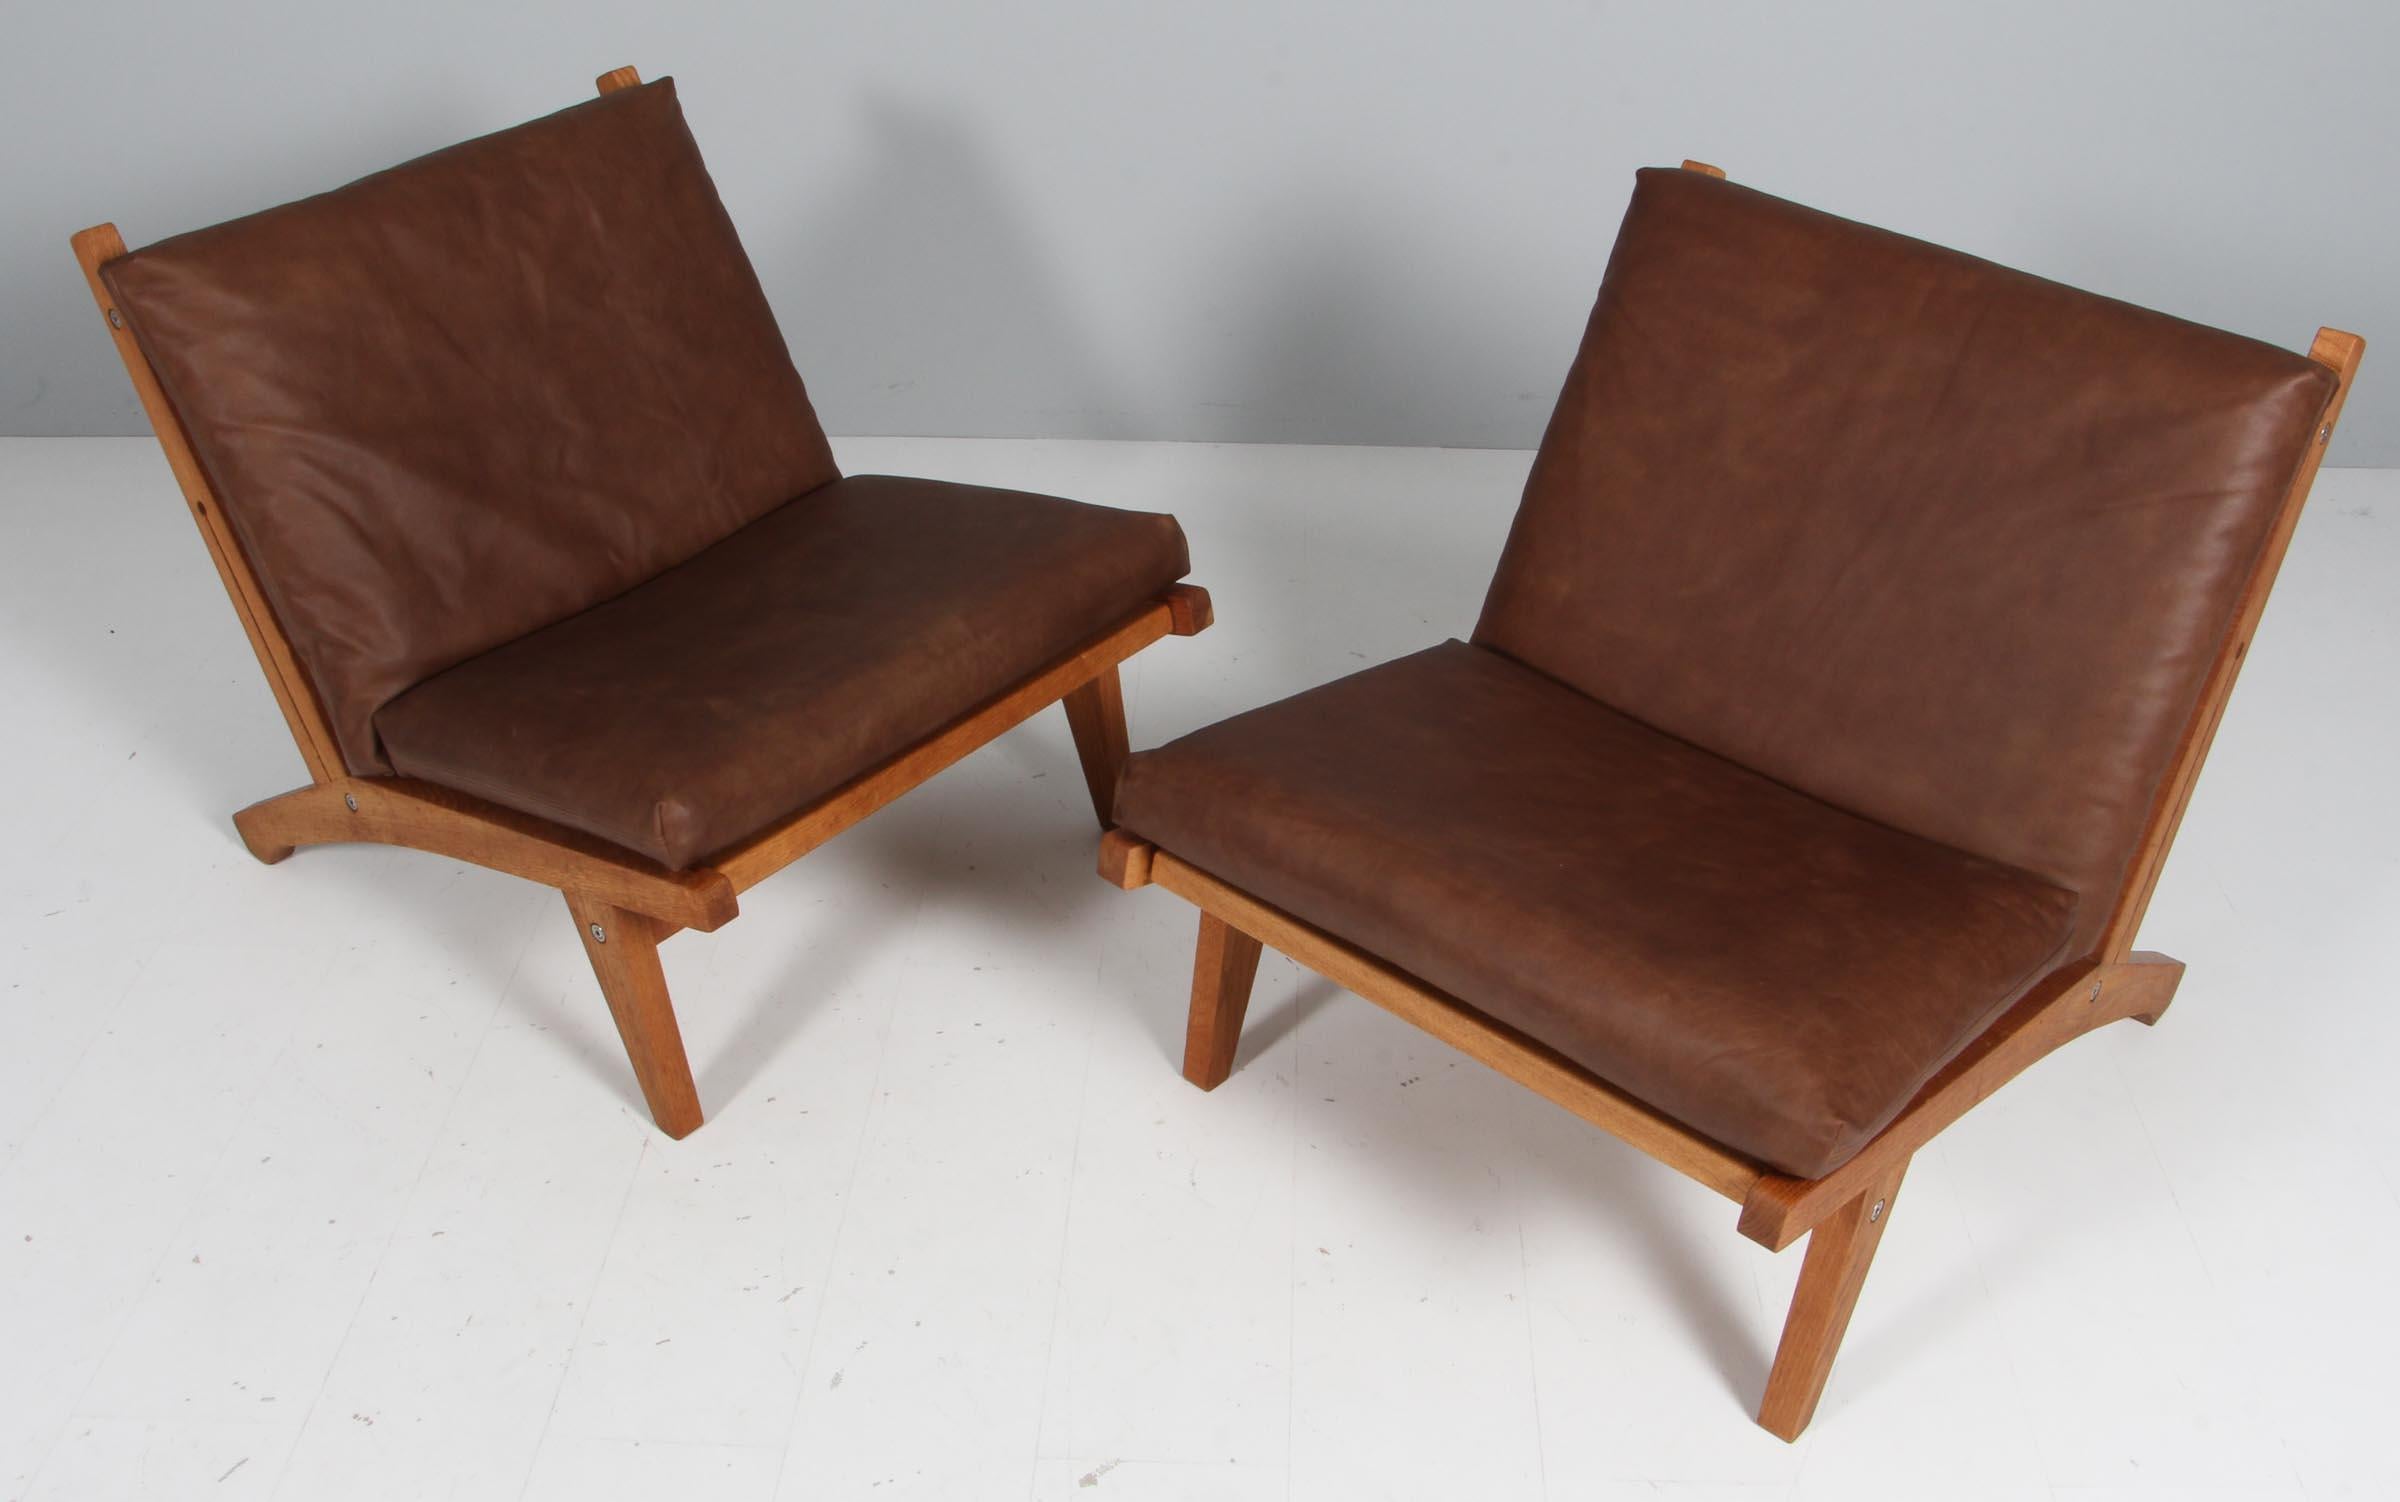 Hans J. Wegner lounge chairs with loose cushions new upholstered with brown aniline leather.

Frame of solid oak

Model GE-370, made by GETAMA.